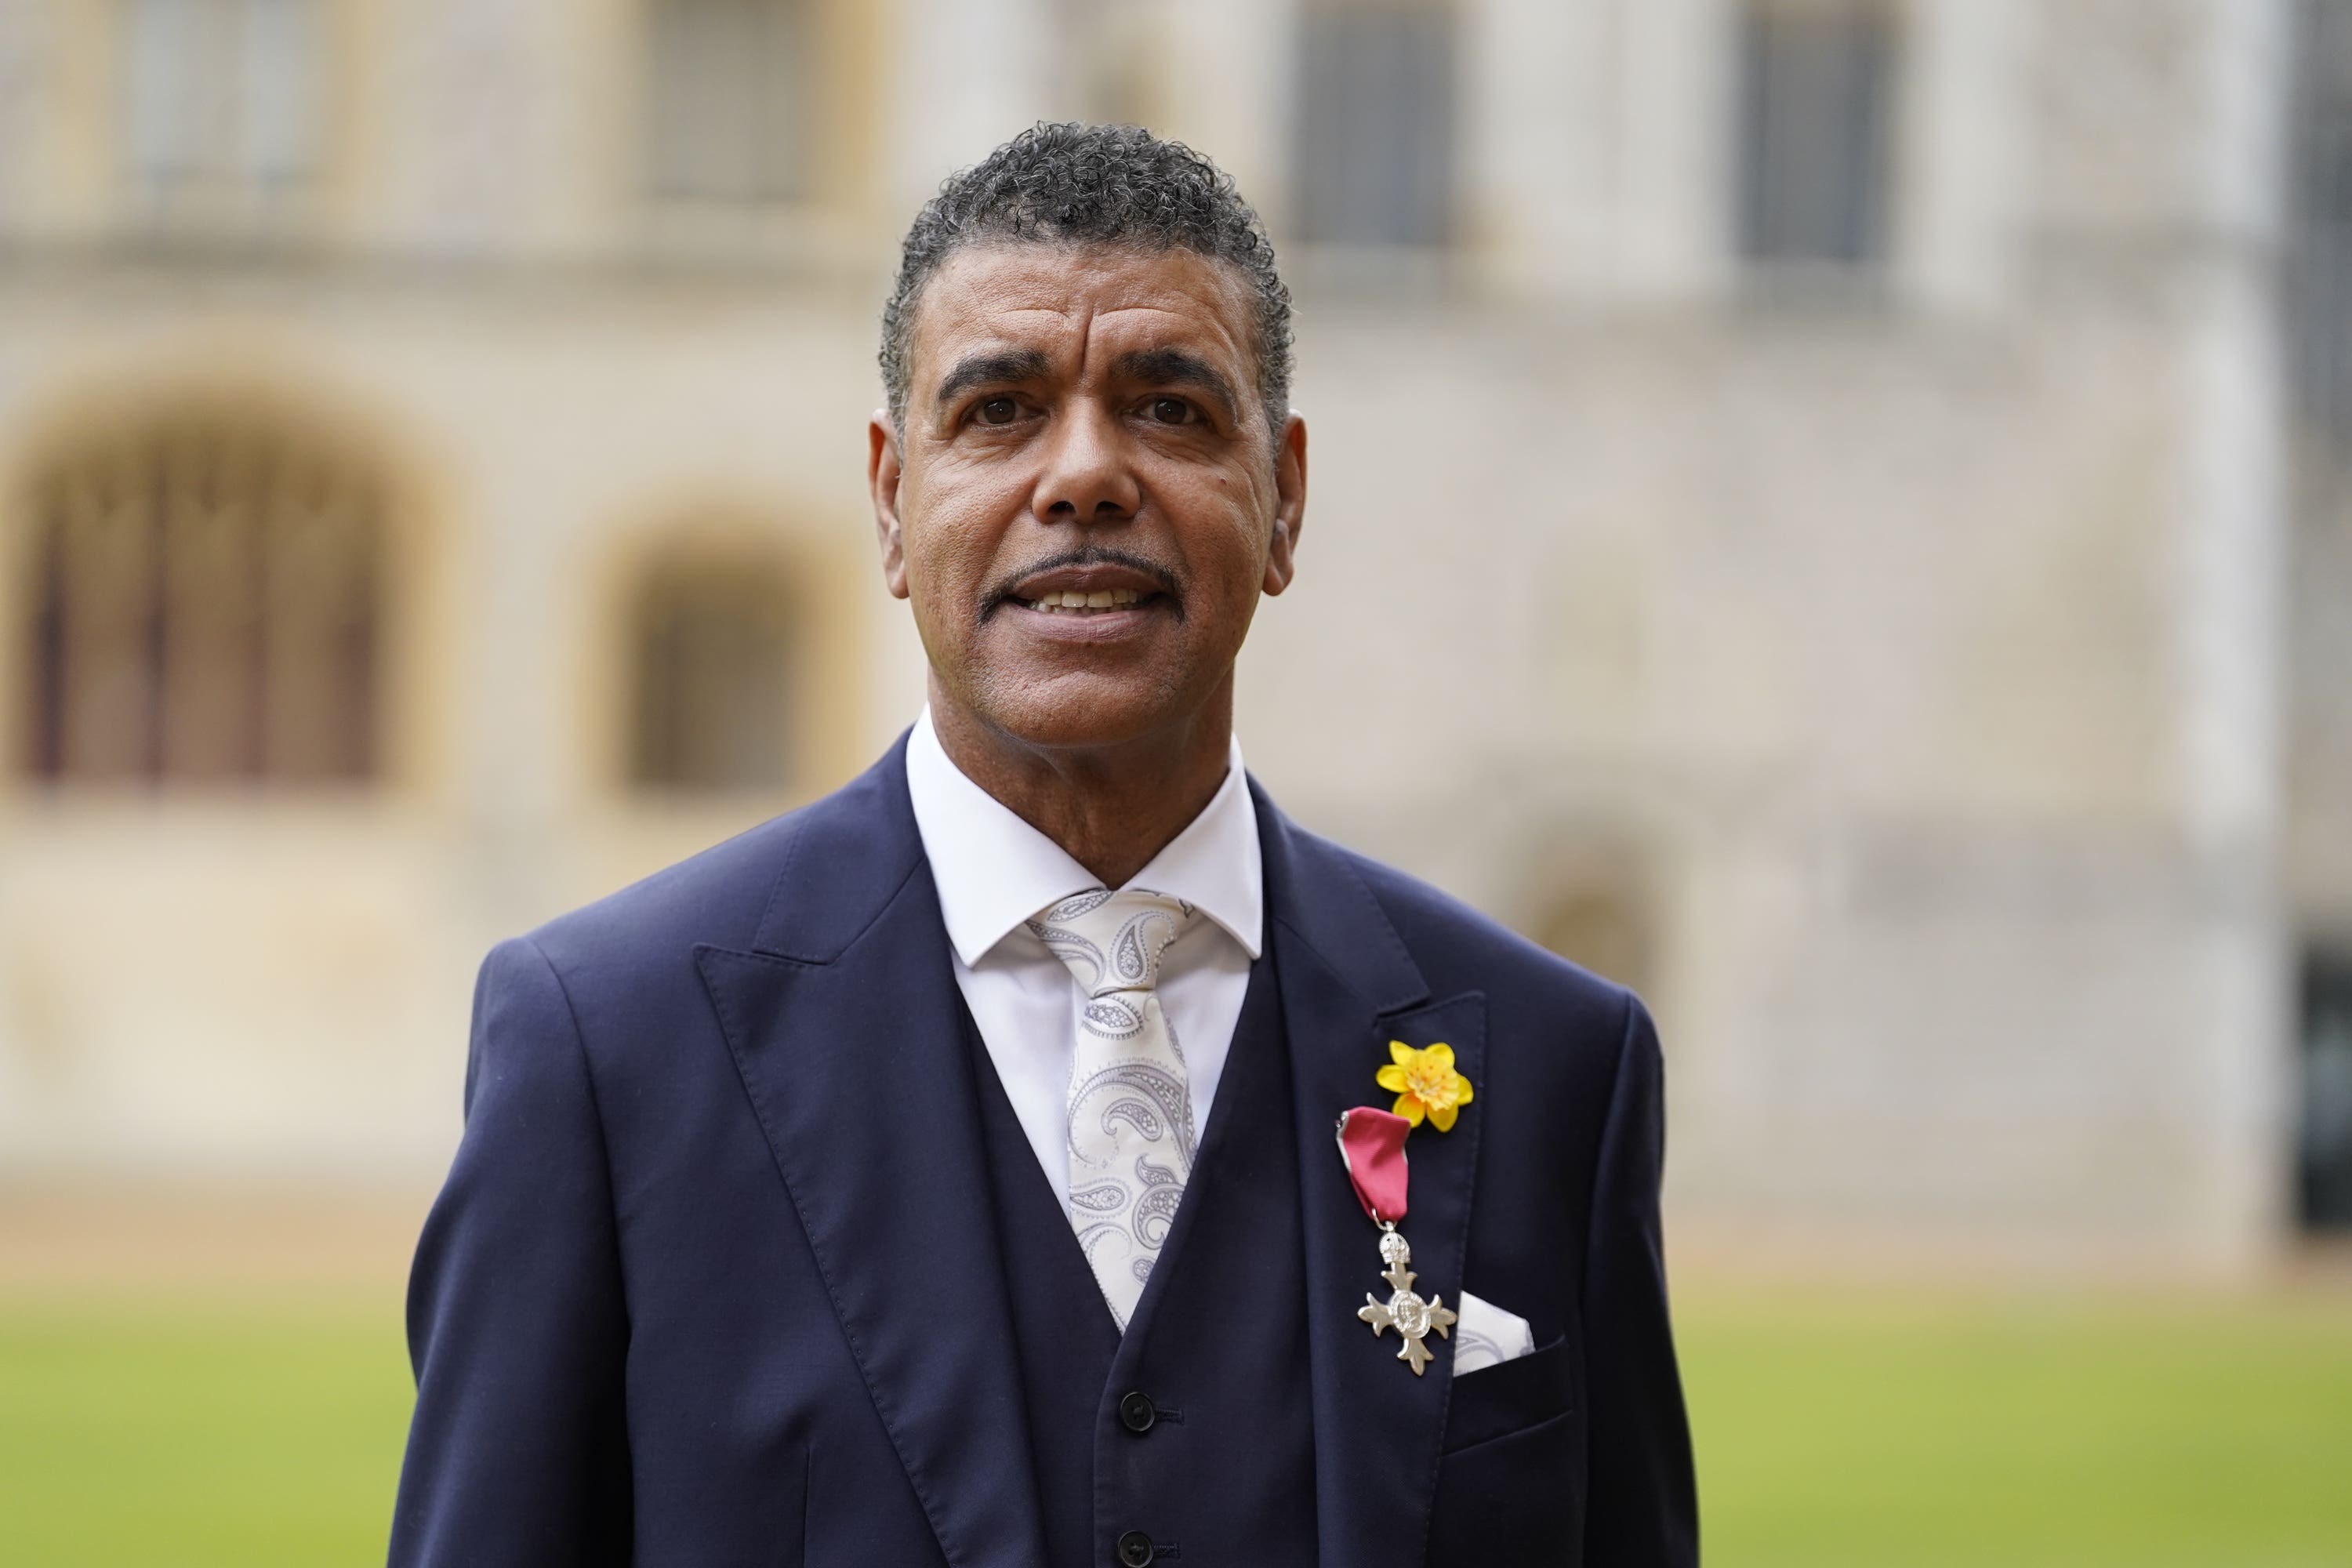 Chris Kamara was presented with his MBE medal by the Prince of Wales at Windsor Castle (Andrew Matthews/PA)